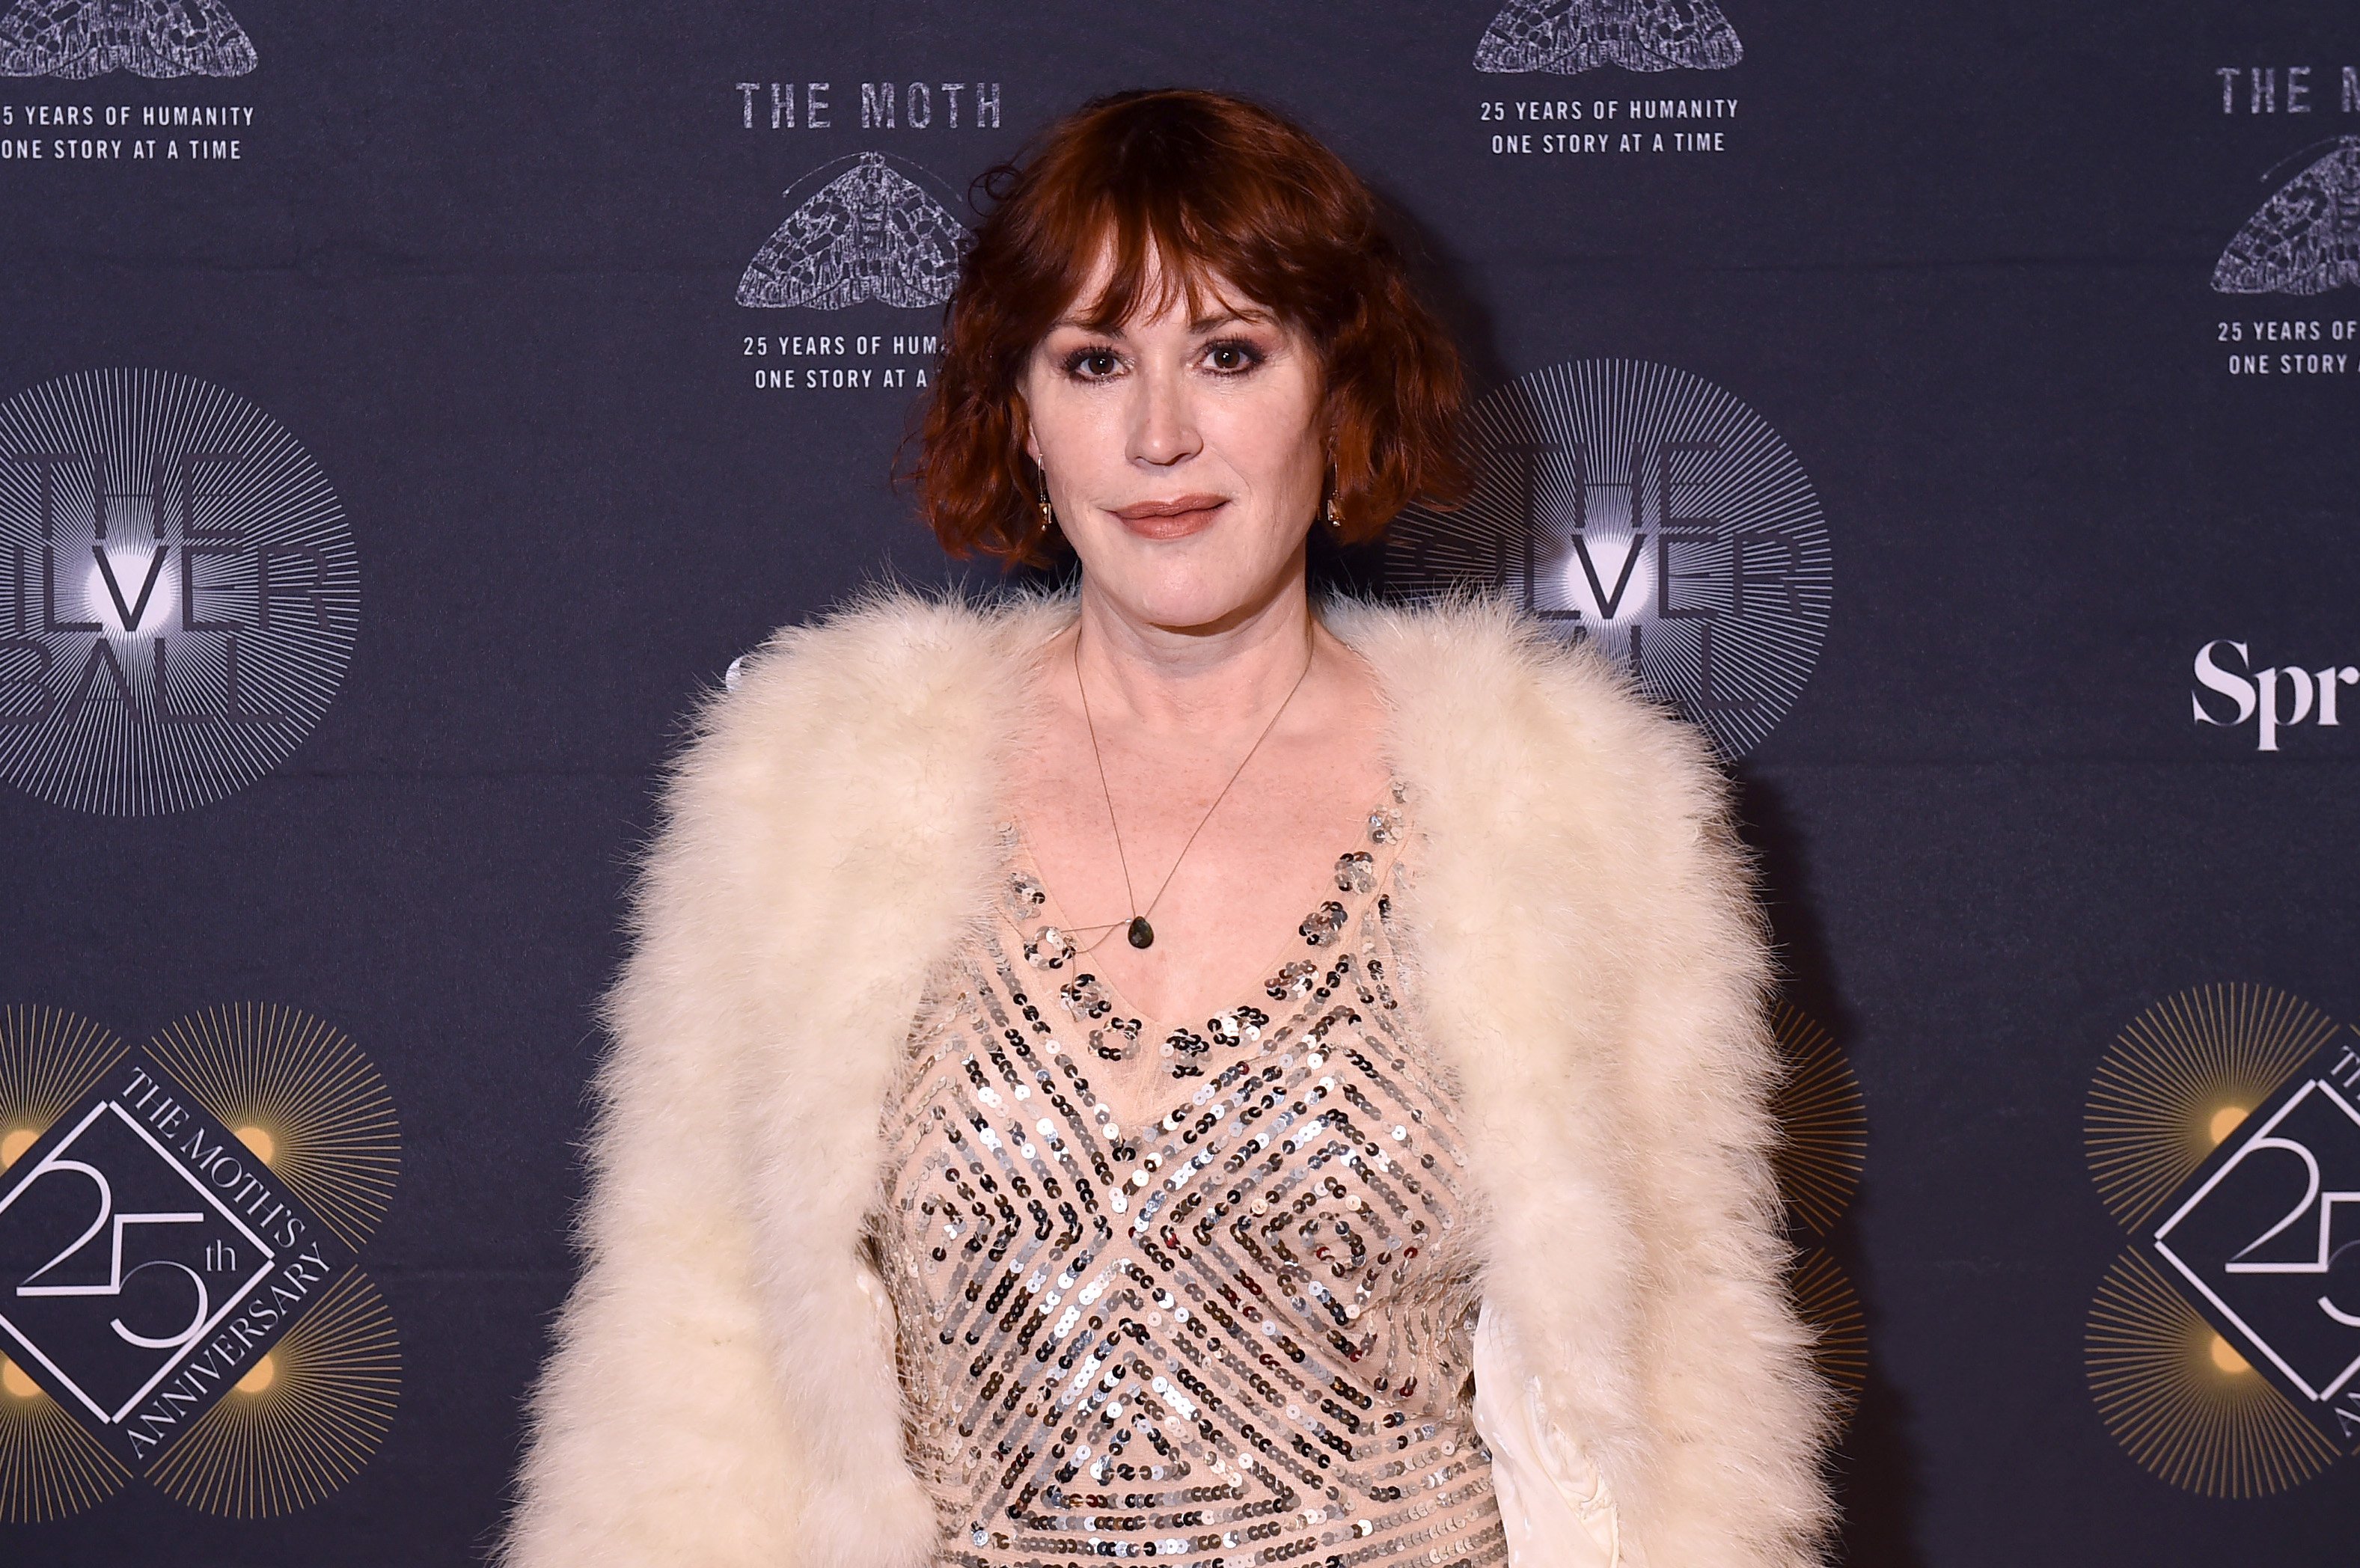 Molly Ringwald attends The Silver Ball: The Moth's 25th Anniversary Gala honoring David Byrne at Spring Studios on May 26, 2022 in New York City | Source: Getty Images